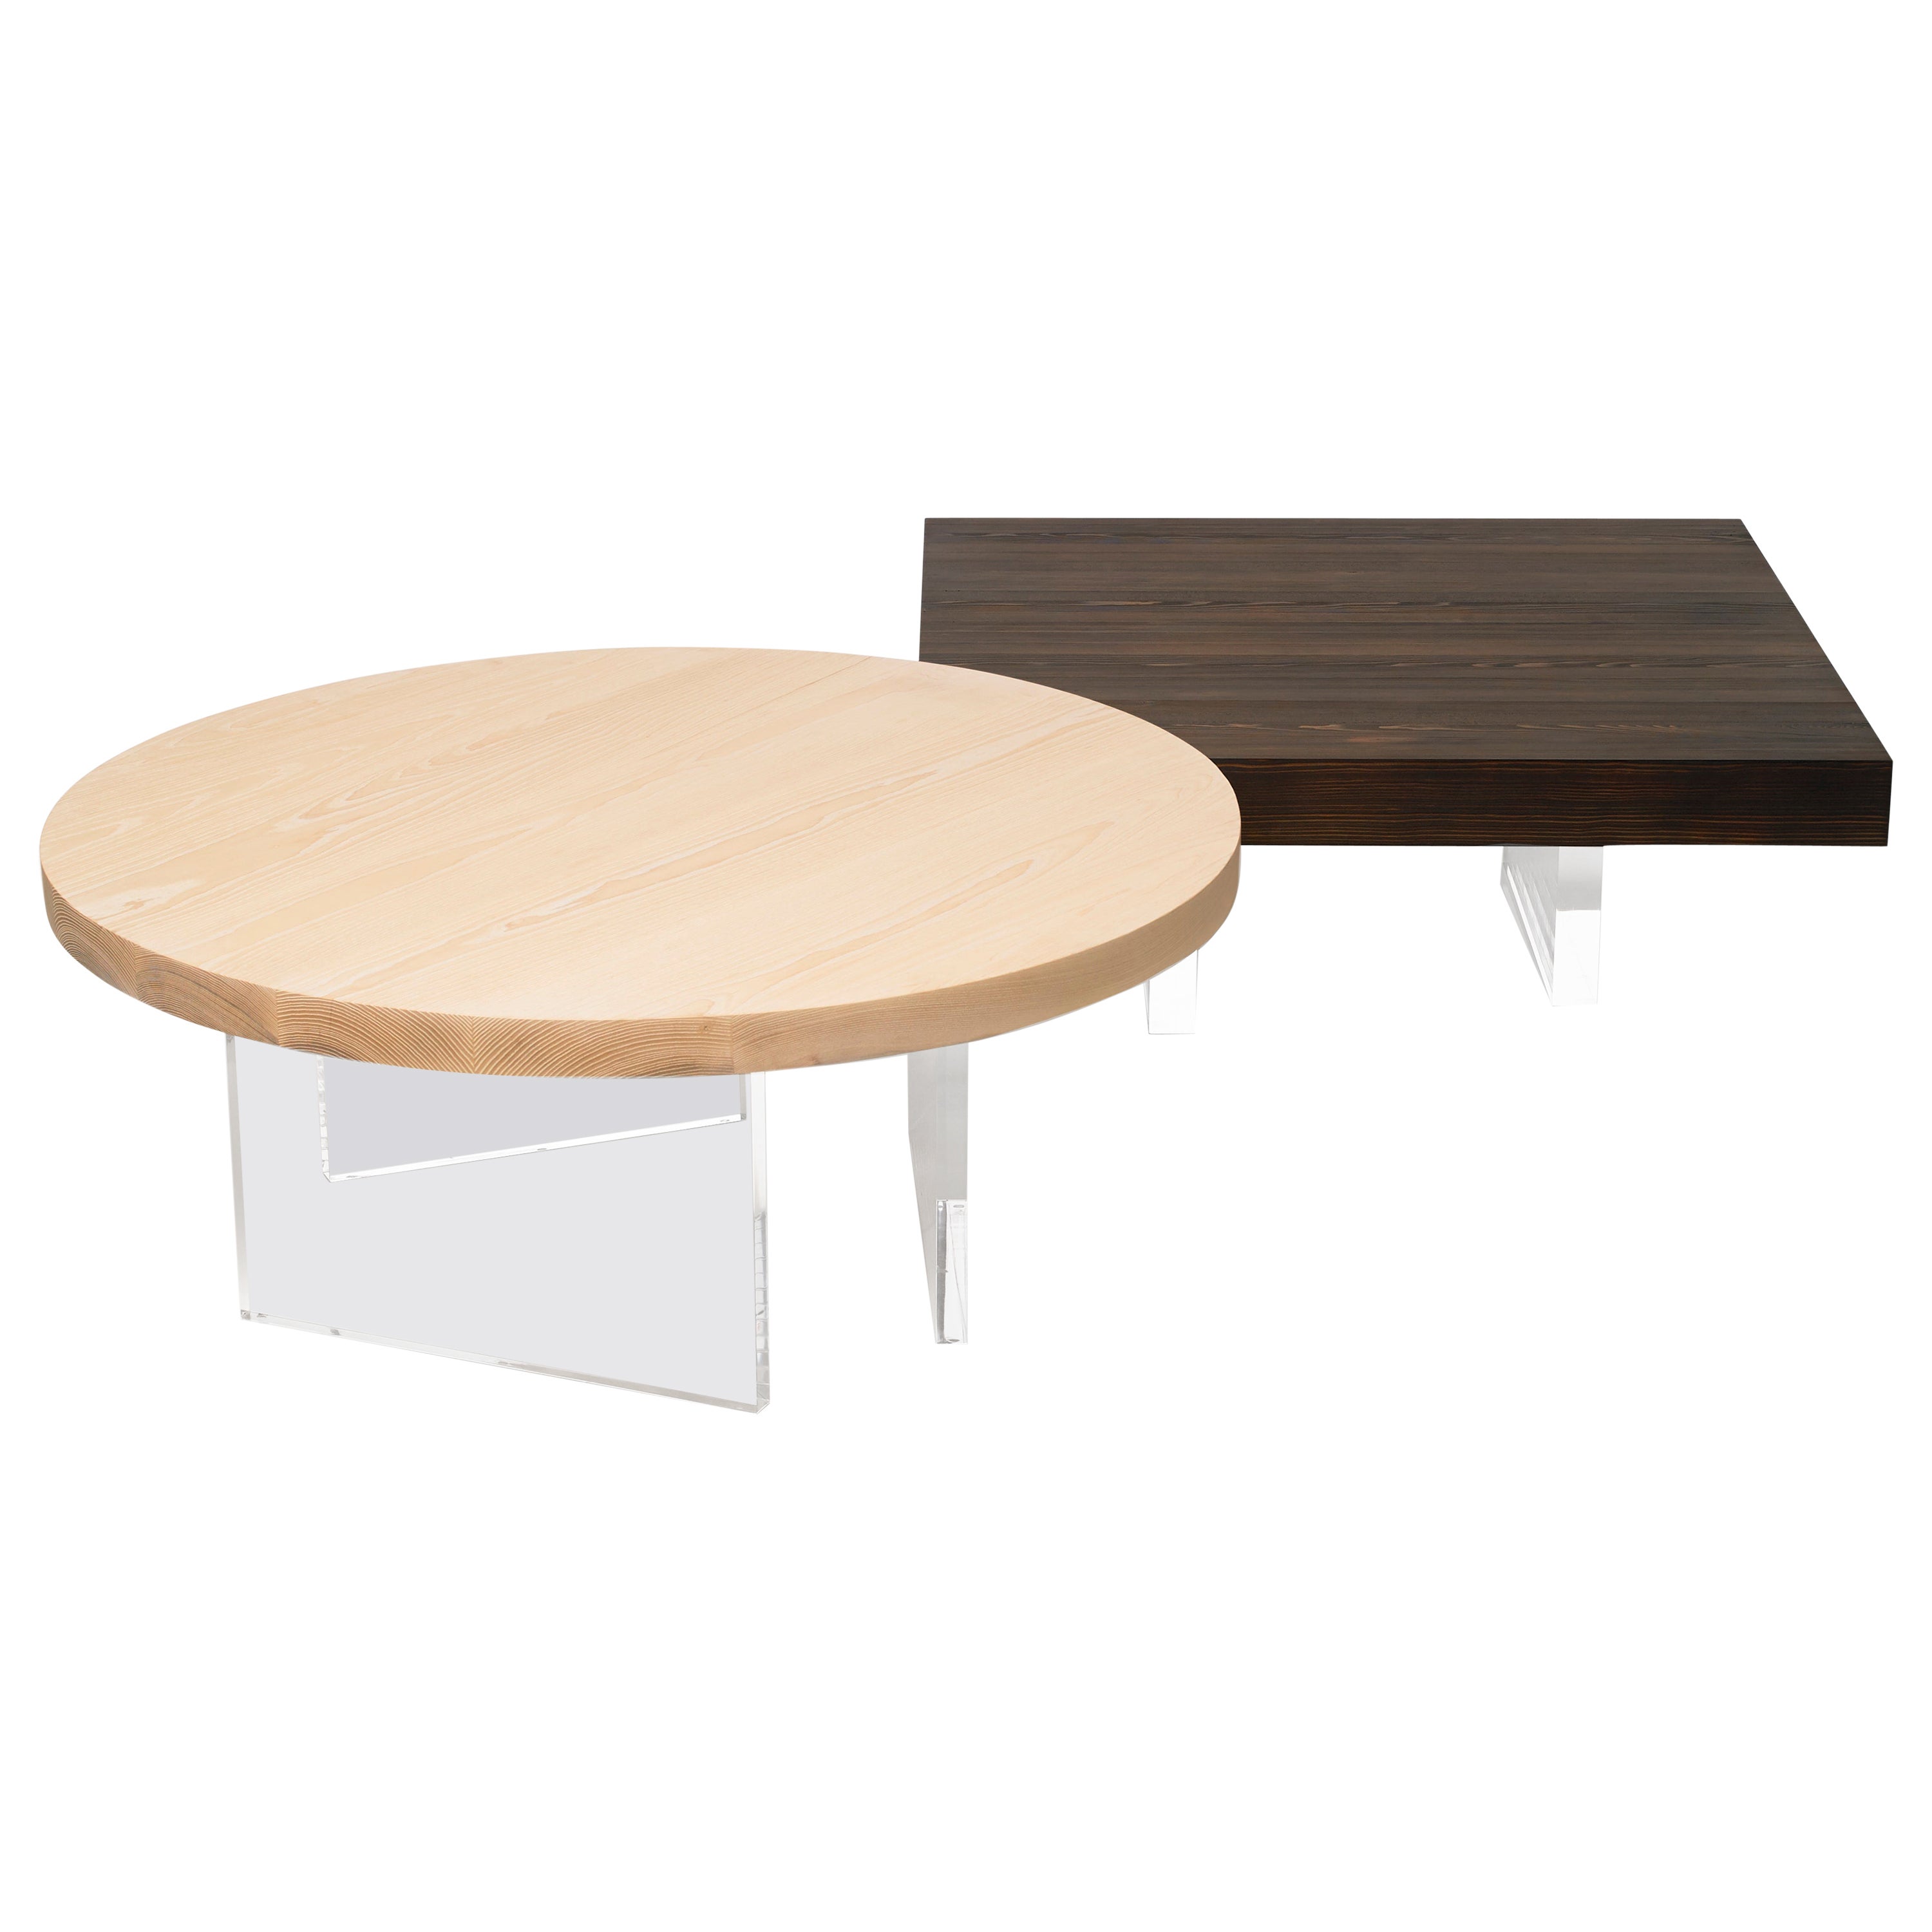 Constantinople Nesting Wood Coffee Table Set by Autonomous Furniture